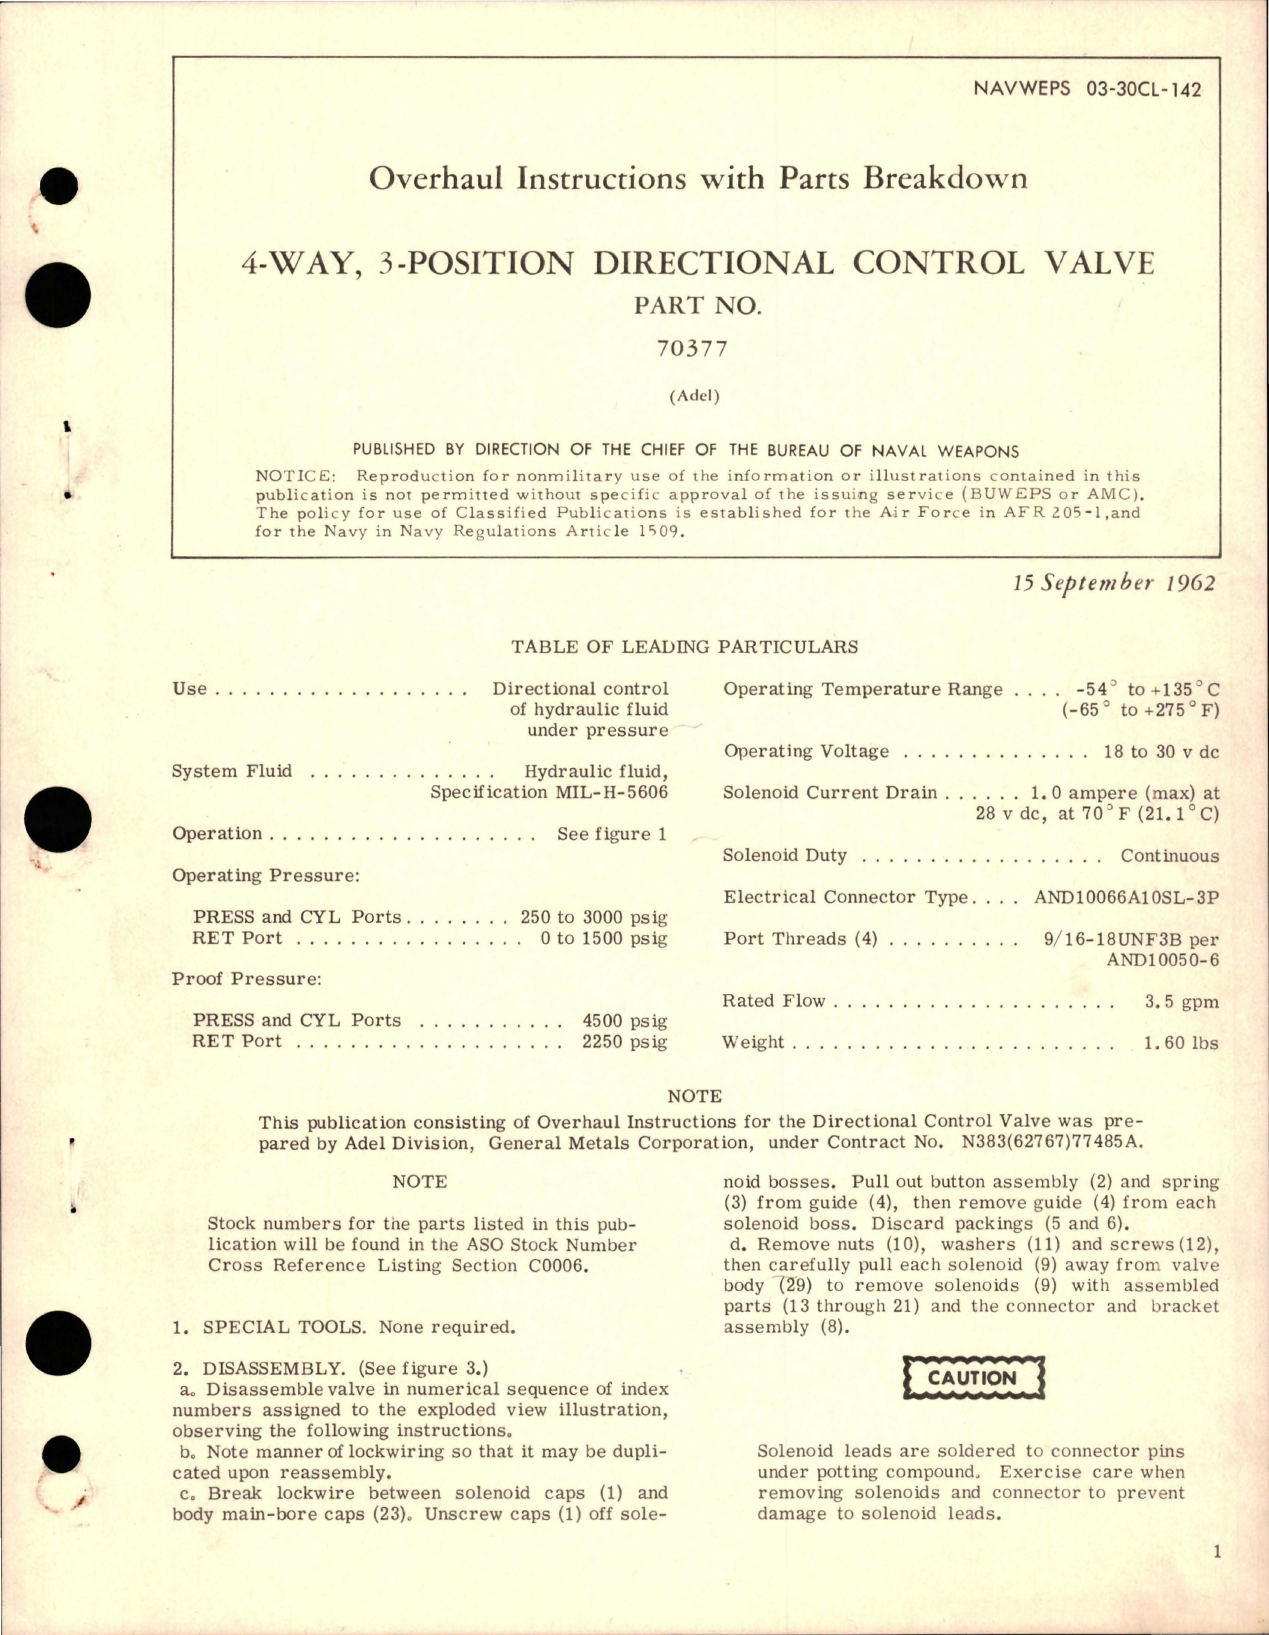 Sample page 1 from AirCorps Library document: Overhaul Instructions w Parts for 4-Way 3-Position Directional Control Valve - Part 70377